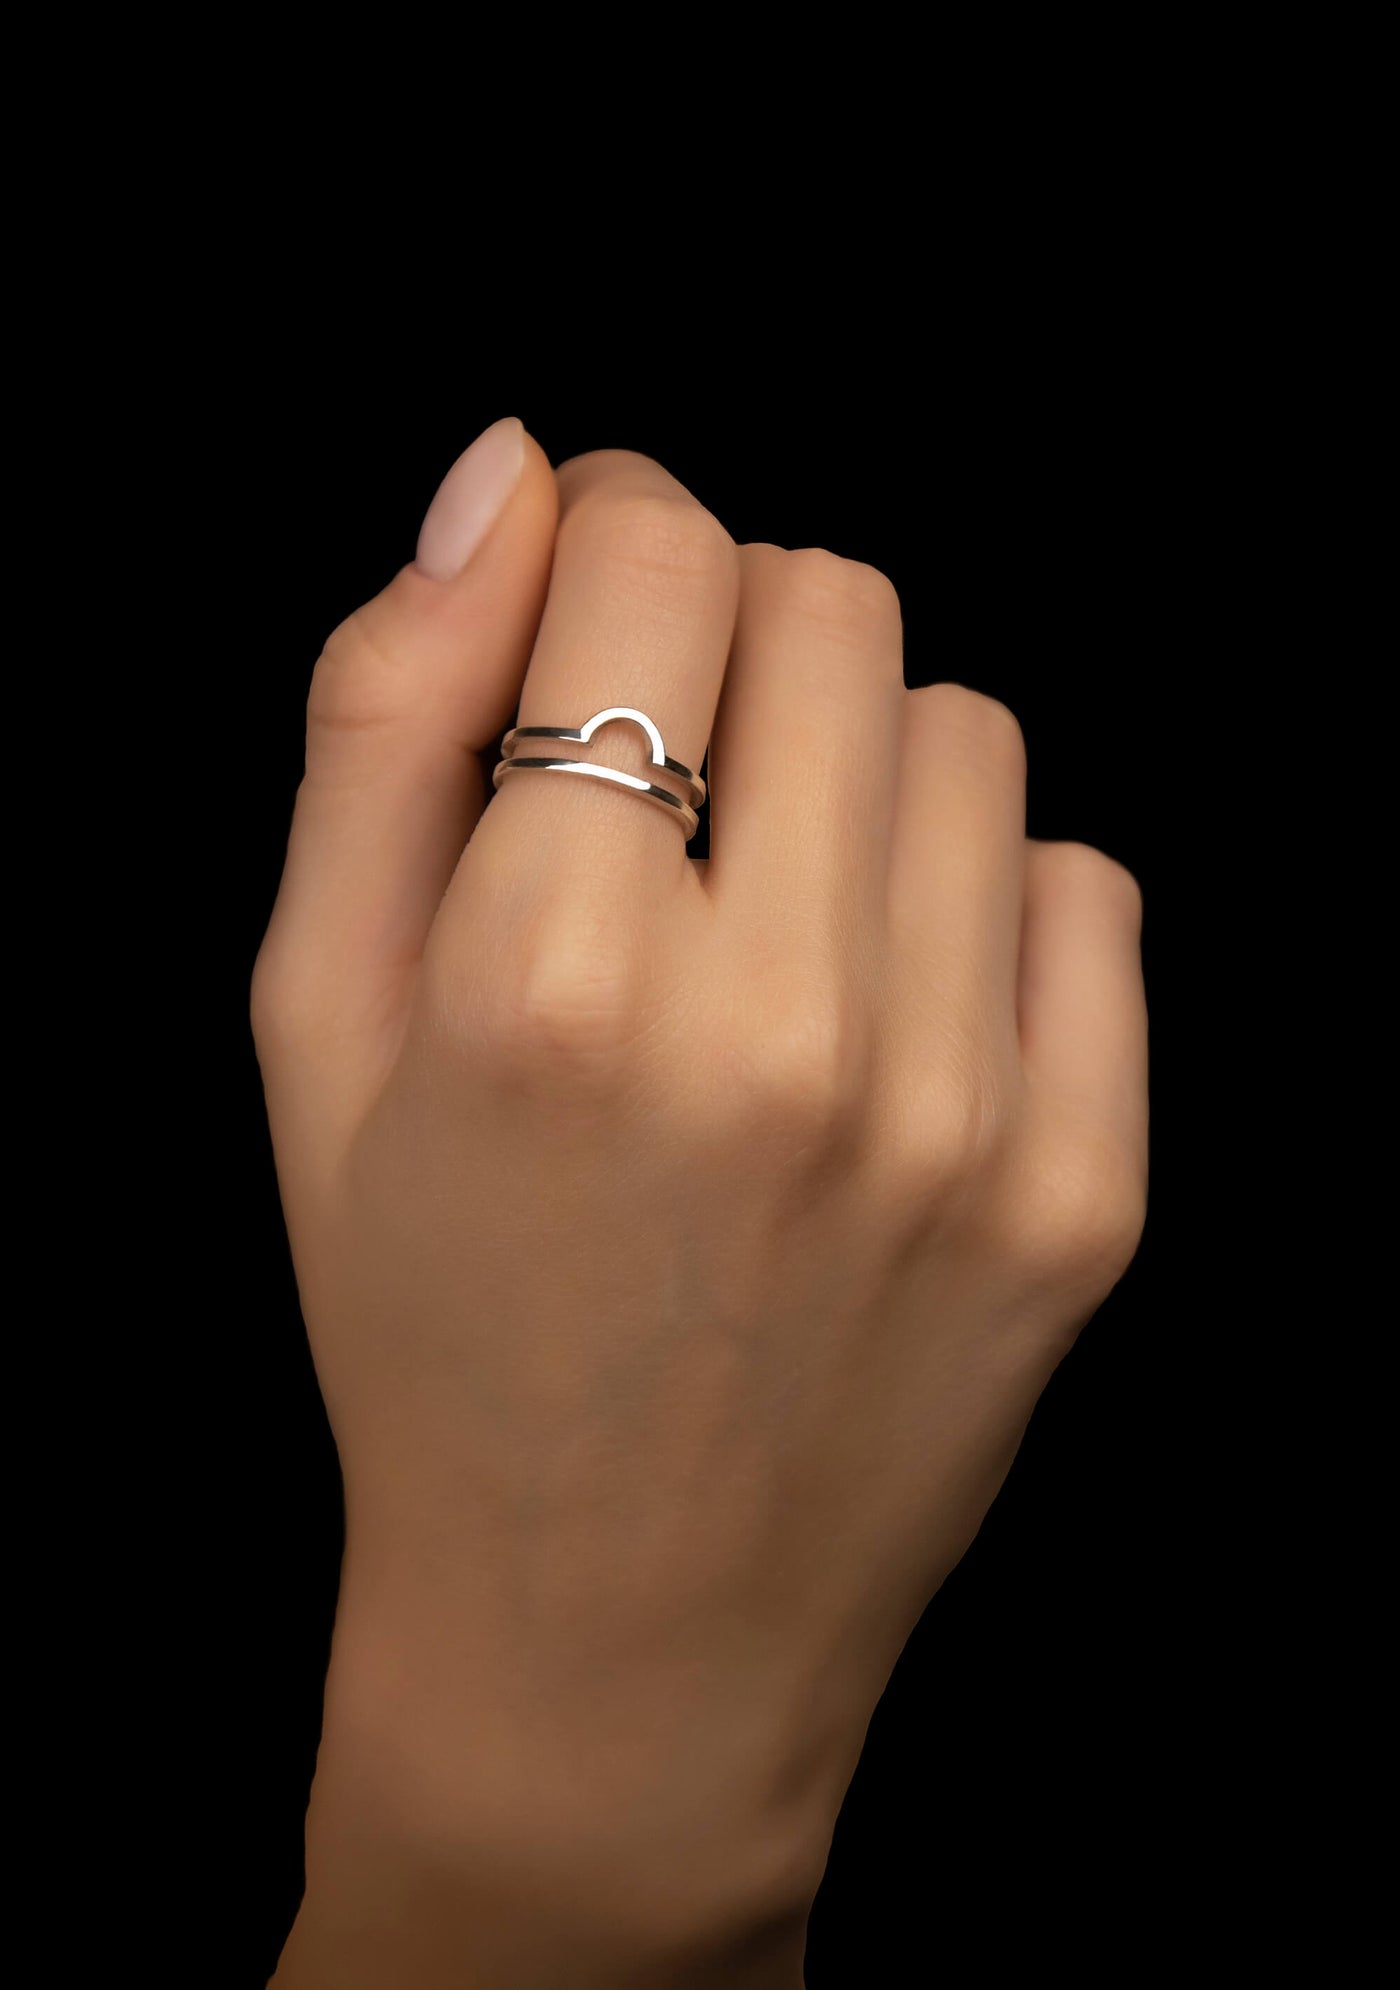 Unisex Libra Ring in Sterling Silver 925.